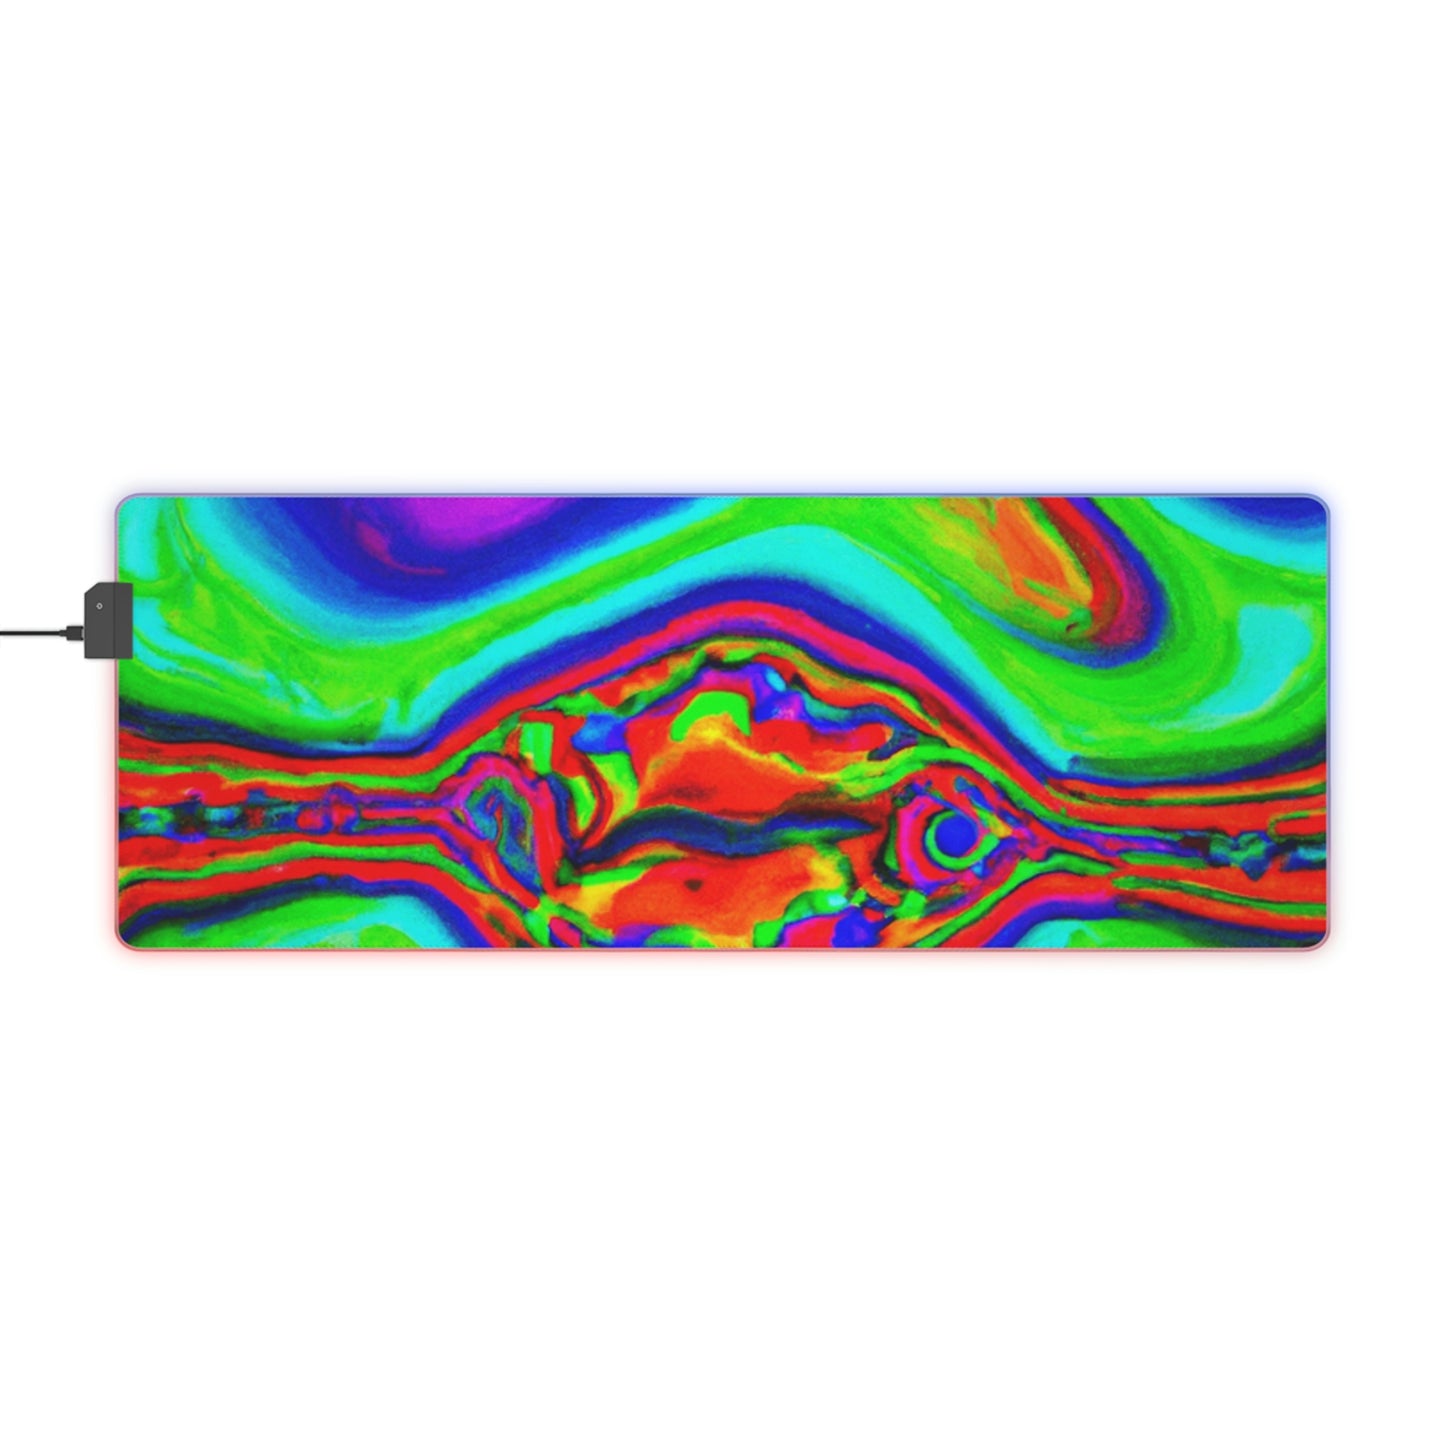 Archie Astroblast - Psychedelic Trippy LED Light Up Gaming Mouse Pad